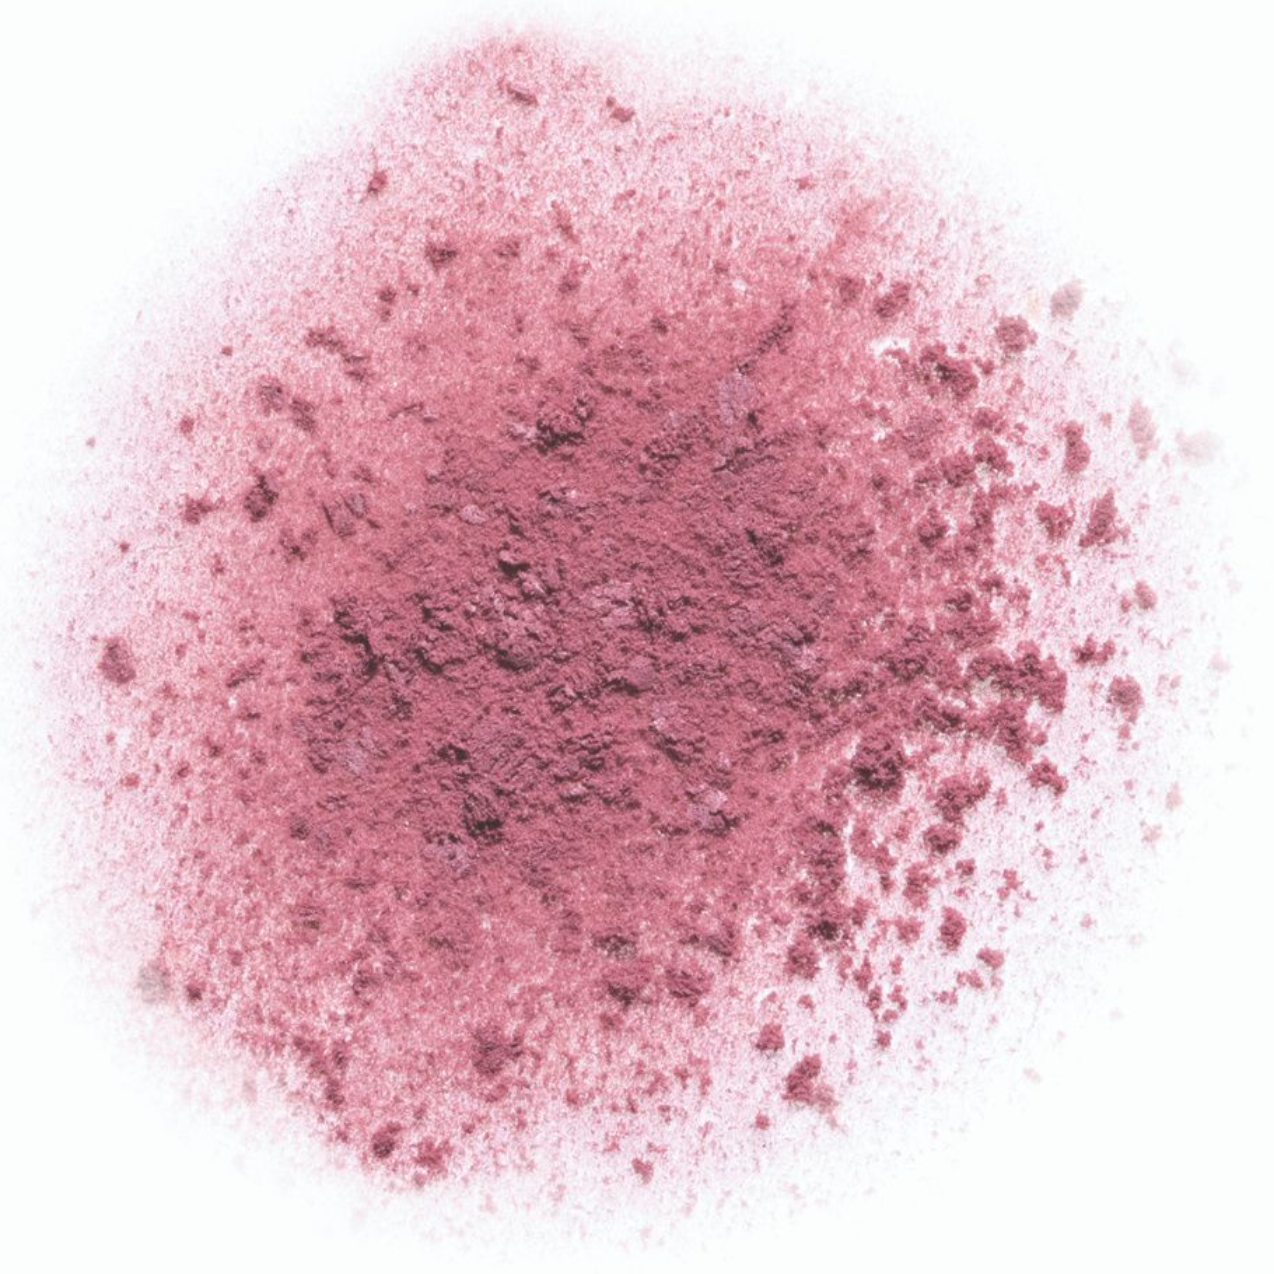 MUD Cosmetics Cheek Color Refill, Berry swatch